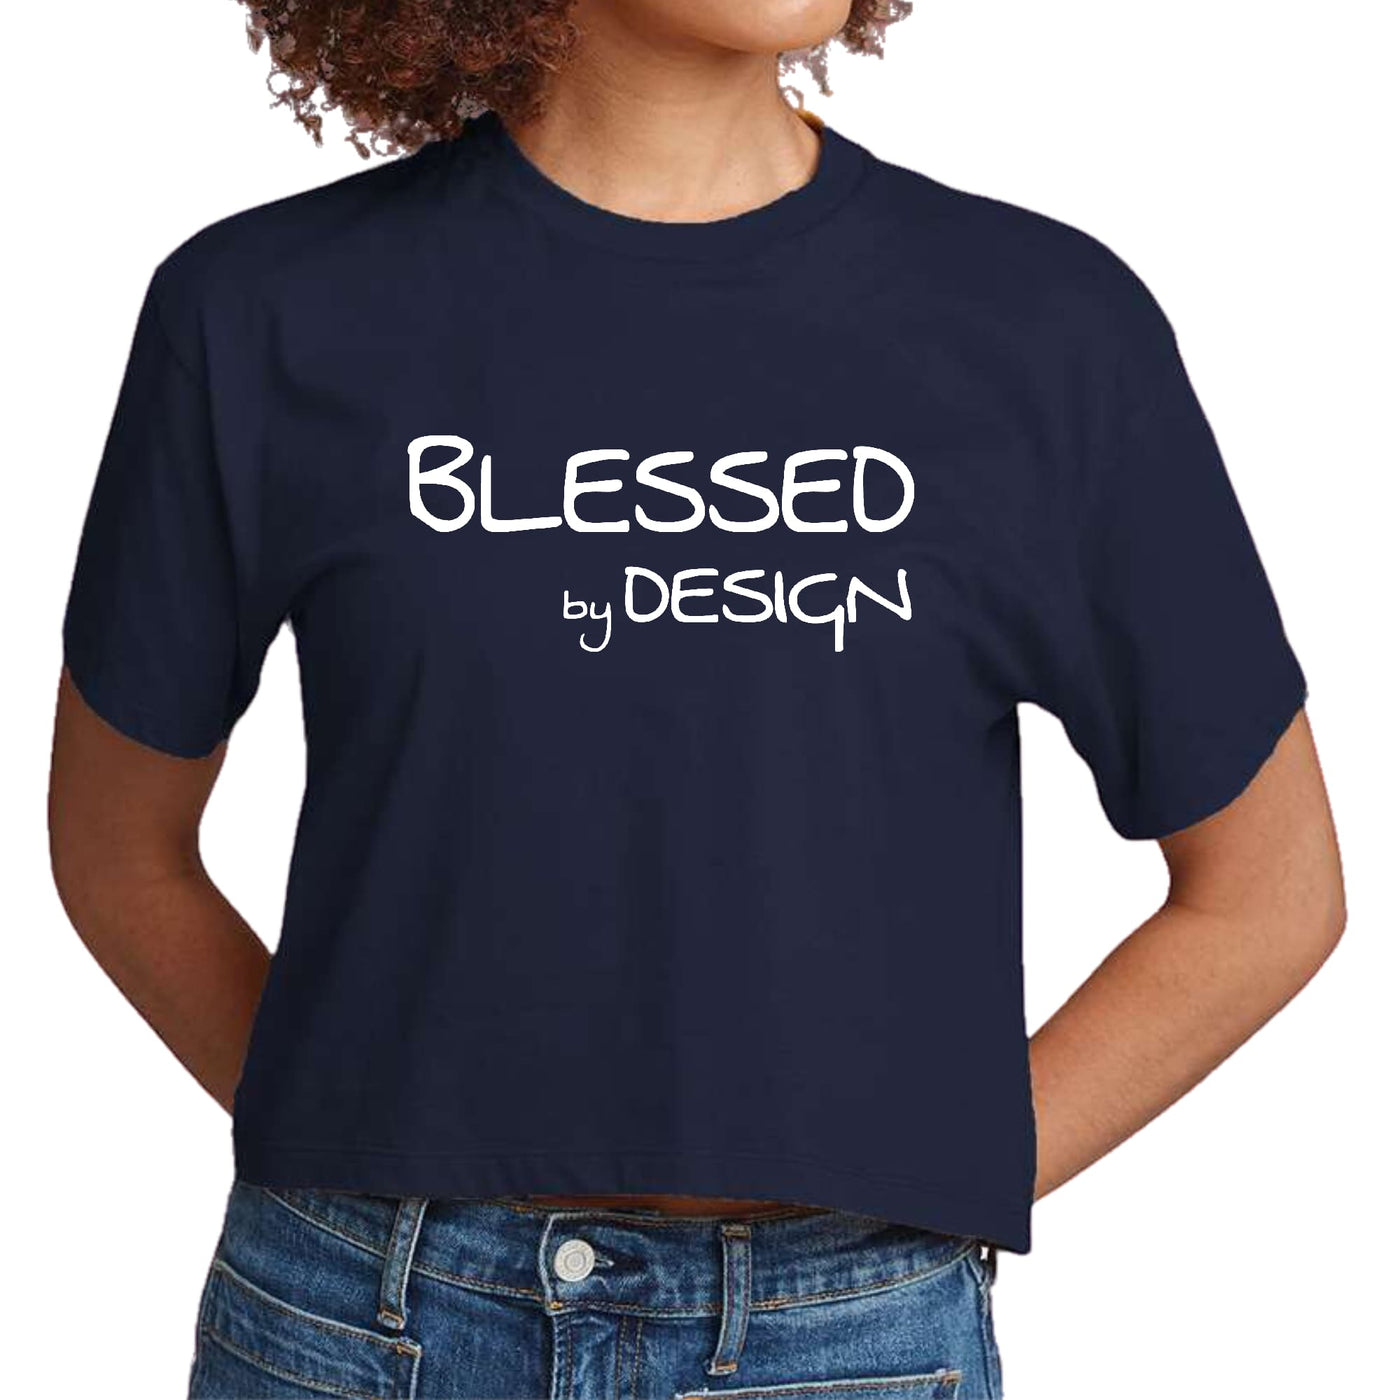 Womens Cropped Graphic T-shirt Blessed By Design - Inspirational - Womens